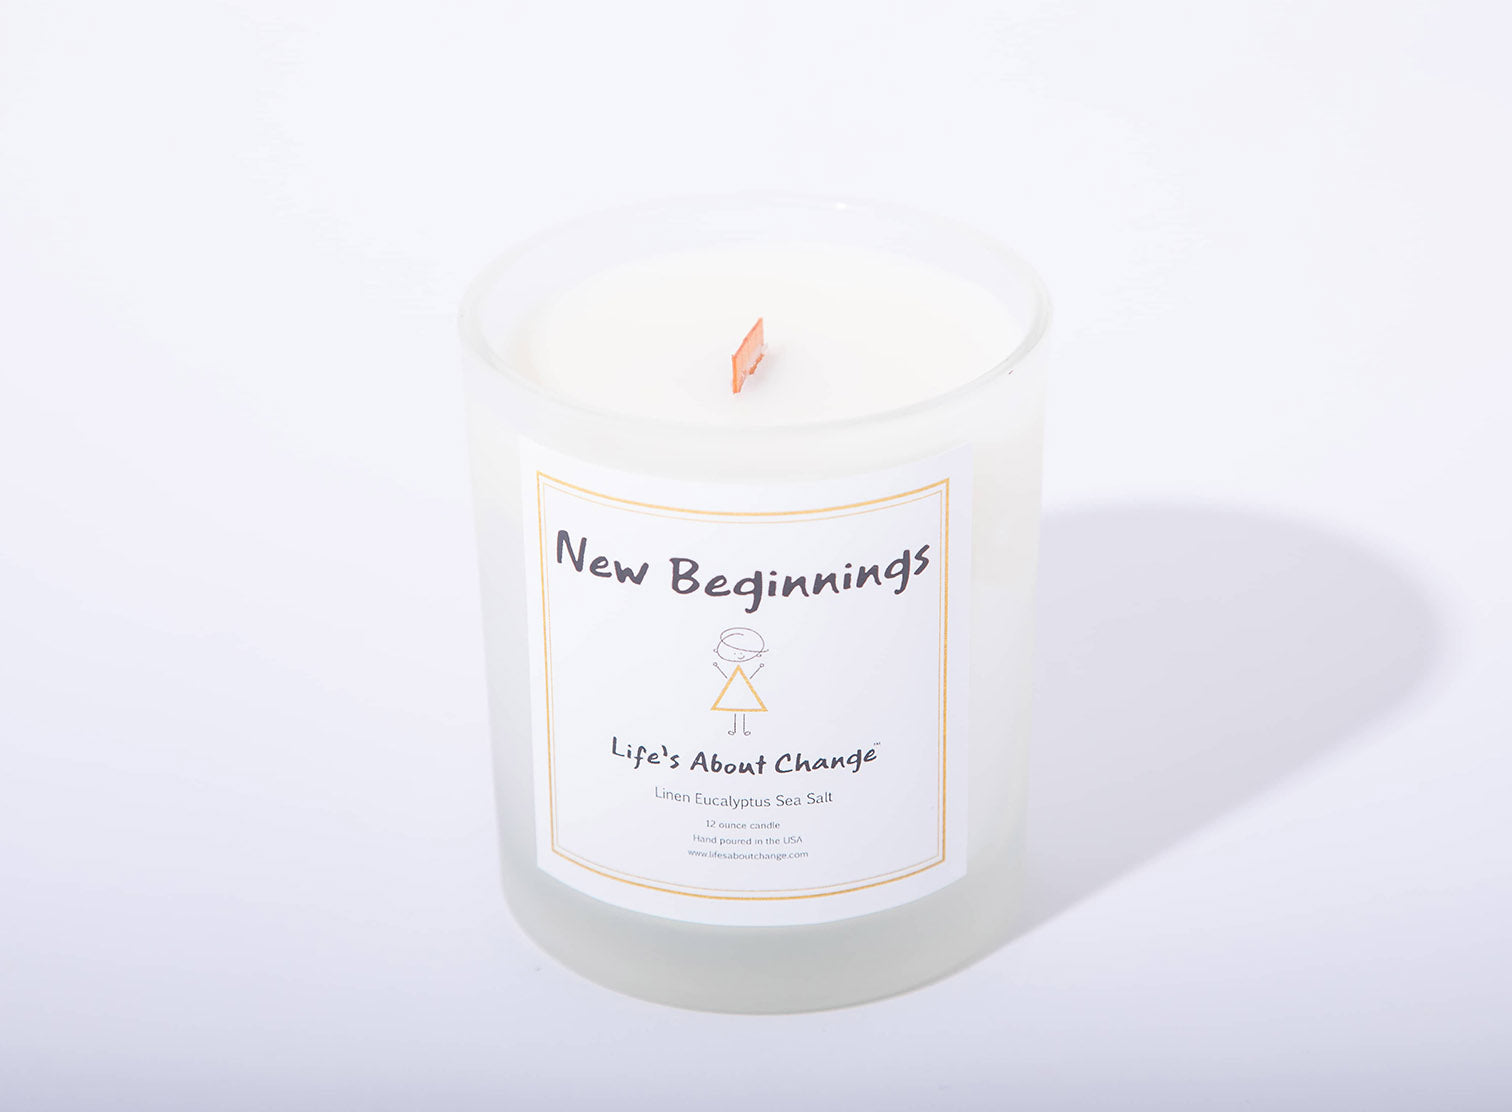 New Beginnings Linen Eucalyptus Sea Salt Candles from Life's About Change Delta Collection